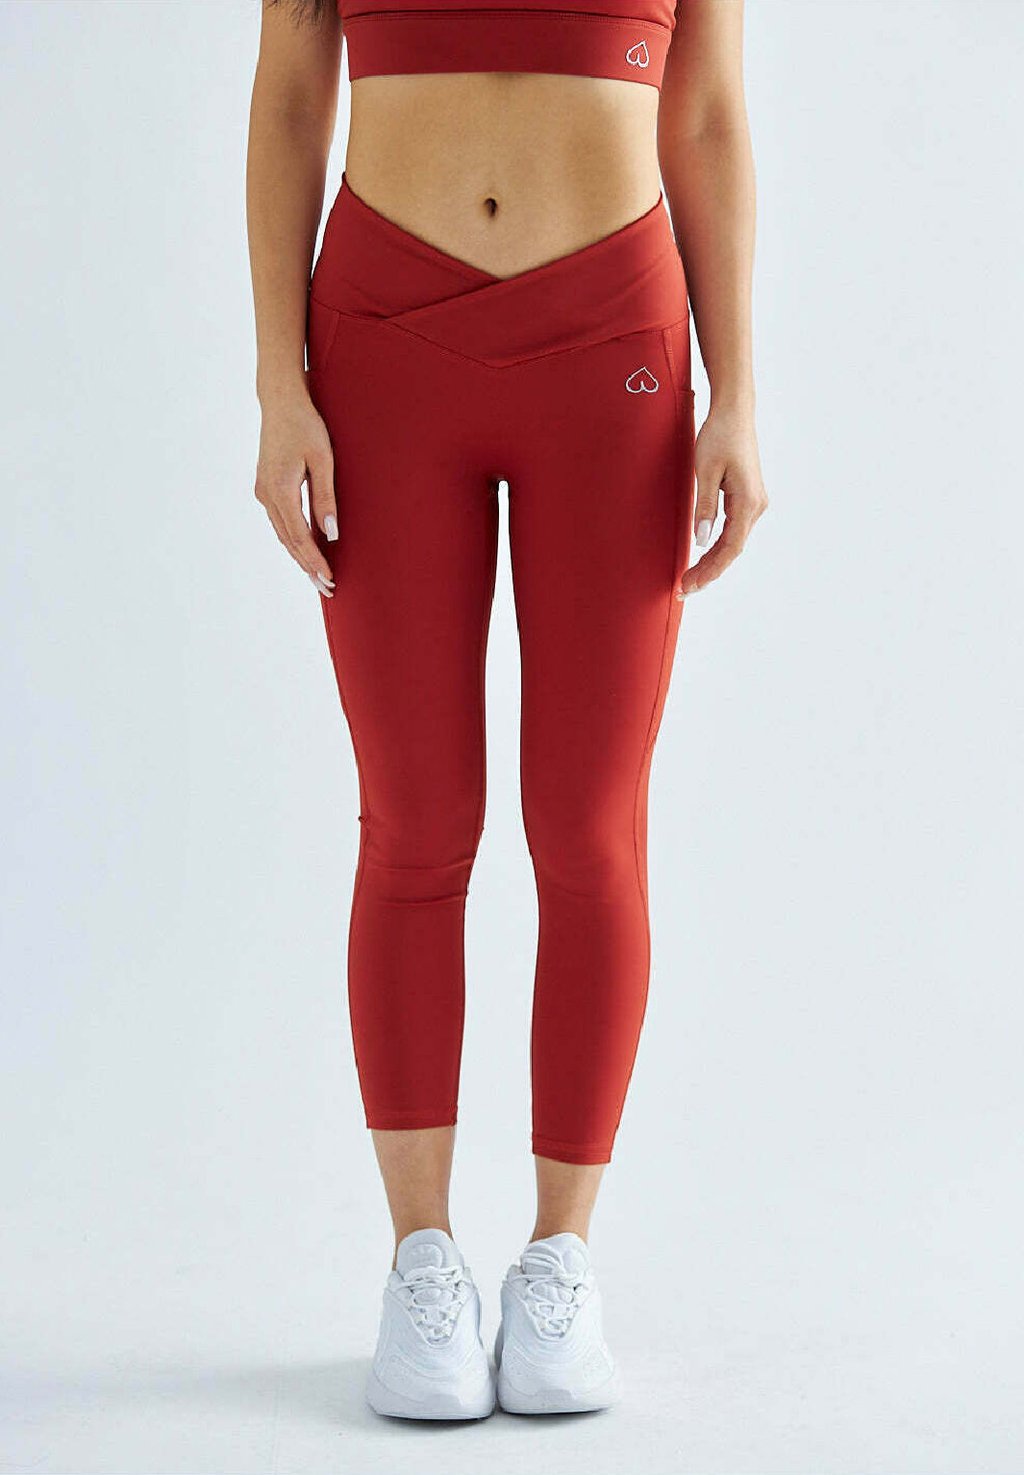 леггинсы sporty Леггинсы SPORTY SPICE POCKETS BeShaped, цвет red